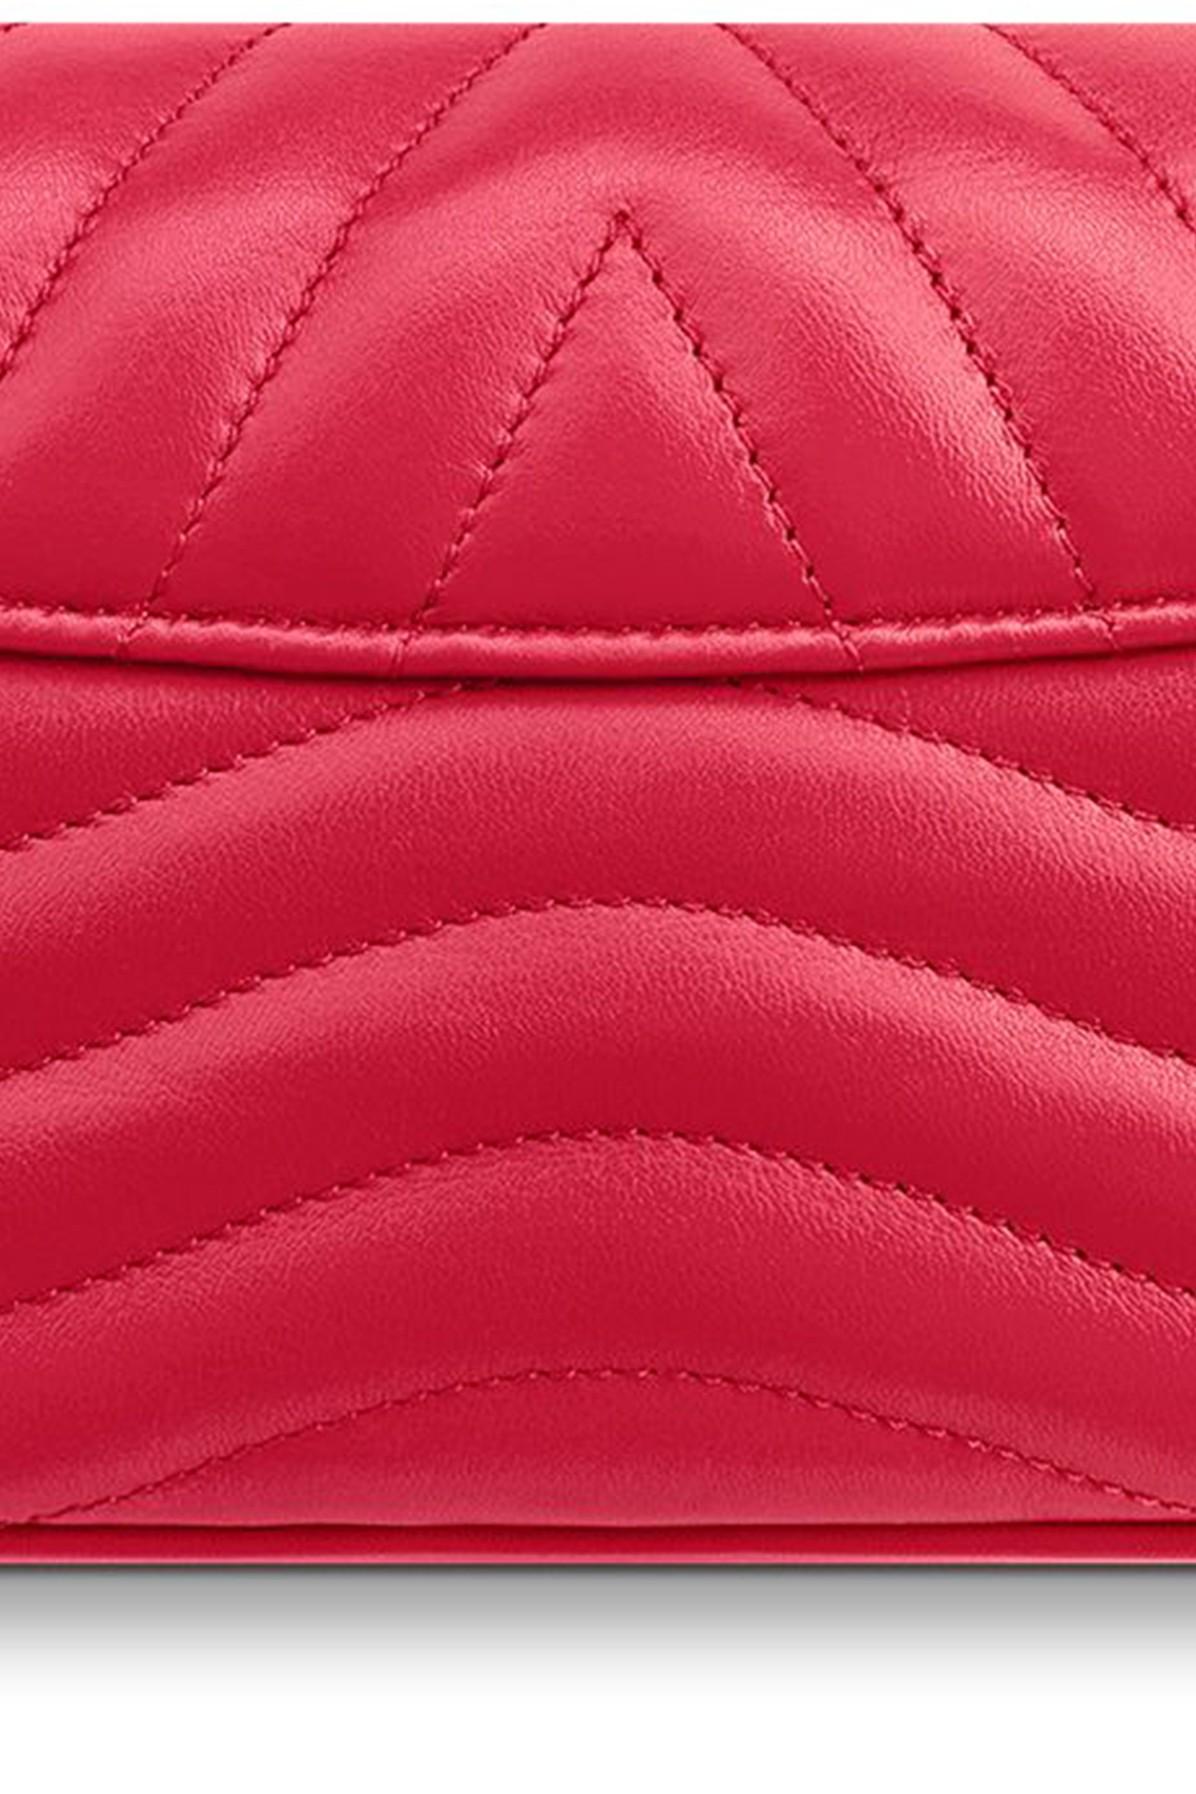 Mint Louis Vuitton New Wave Tote Leather Red Bag